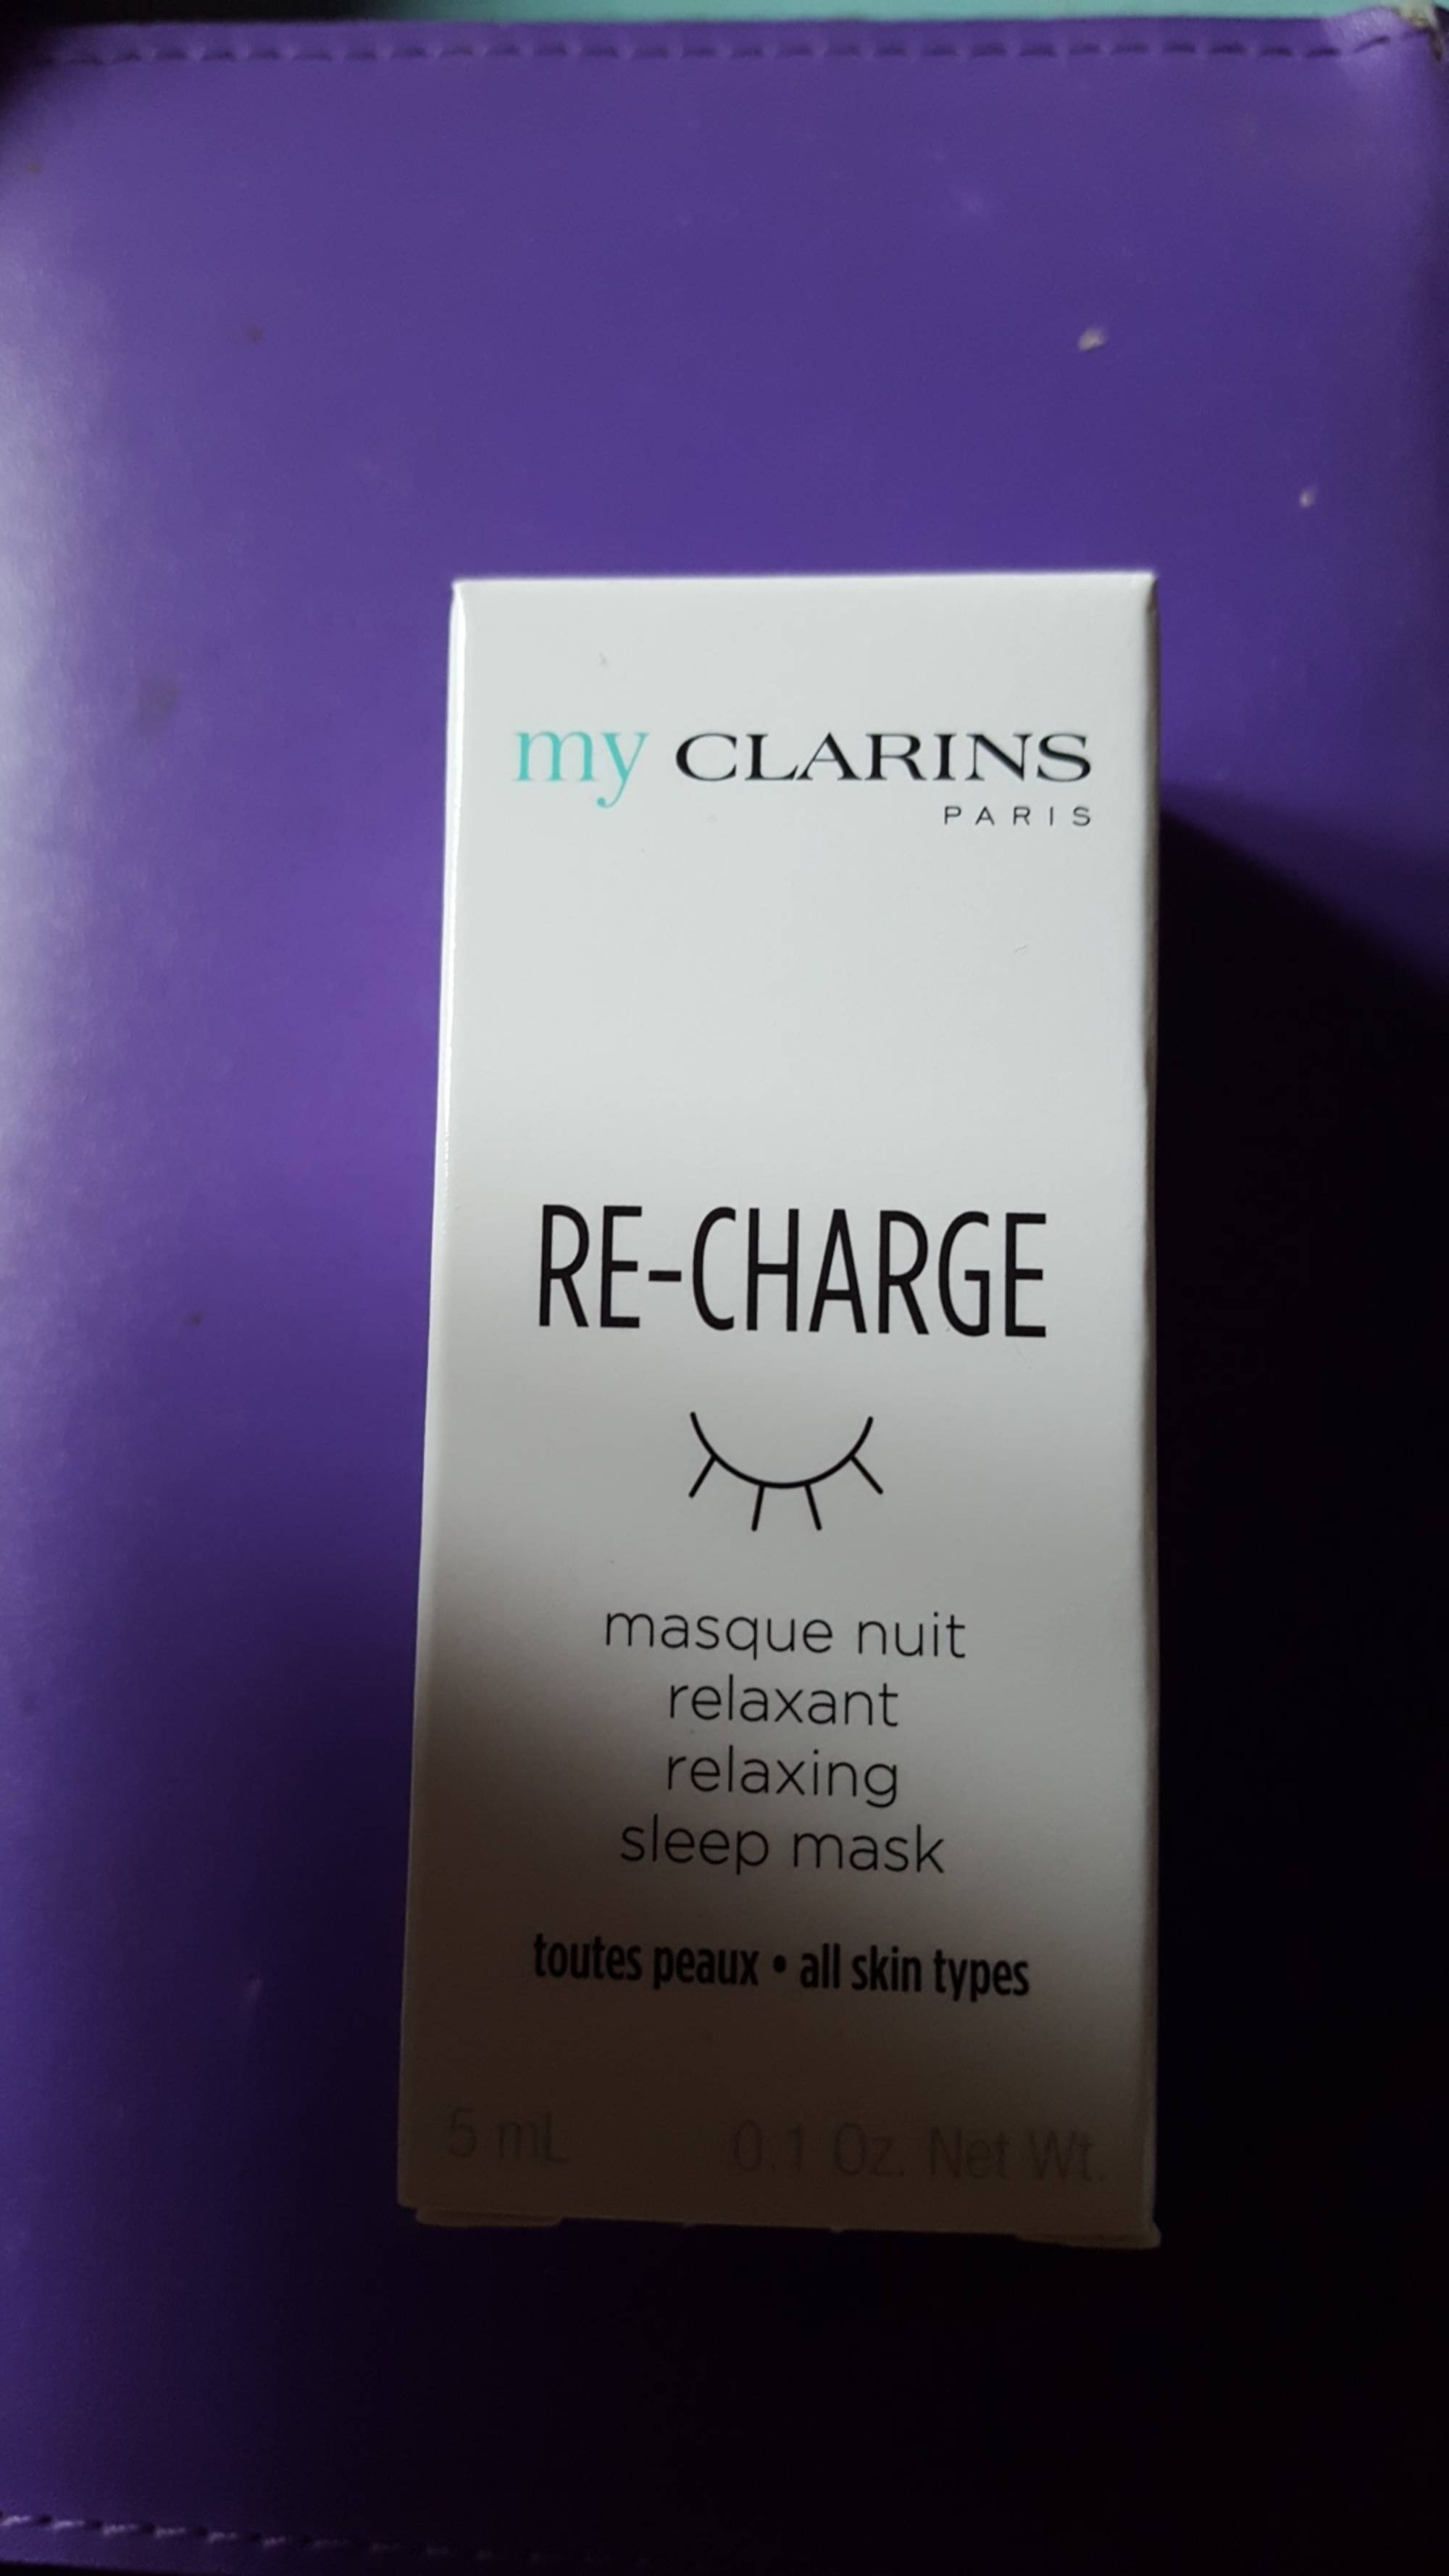 CLARINS - My clarins re-charge - Masque nuit relaxant